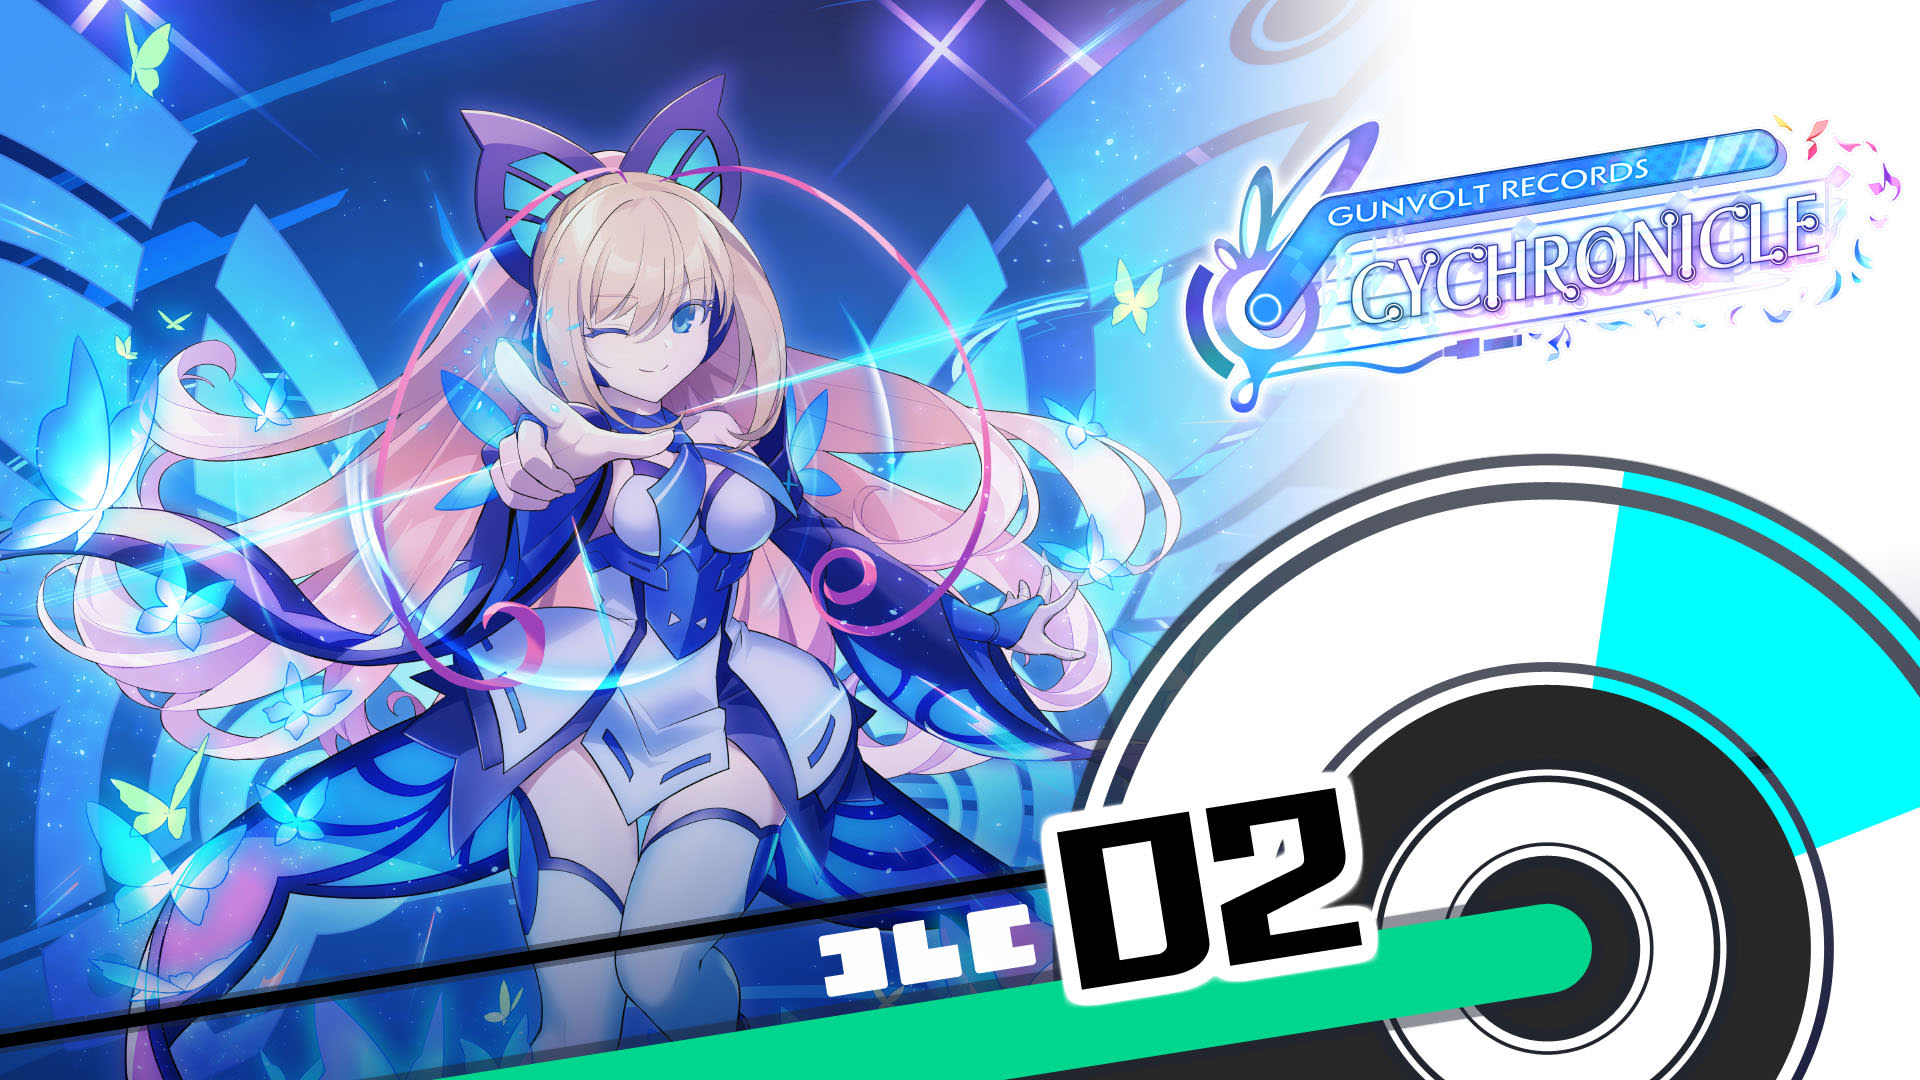 GUNVOLT RECORDS Cychronicle Song Pack 2 Lumen: ♪Pain From the Past ♪Stratosphere ♪Struggling to Dream ♪Twilight Skyline 1